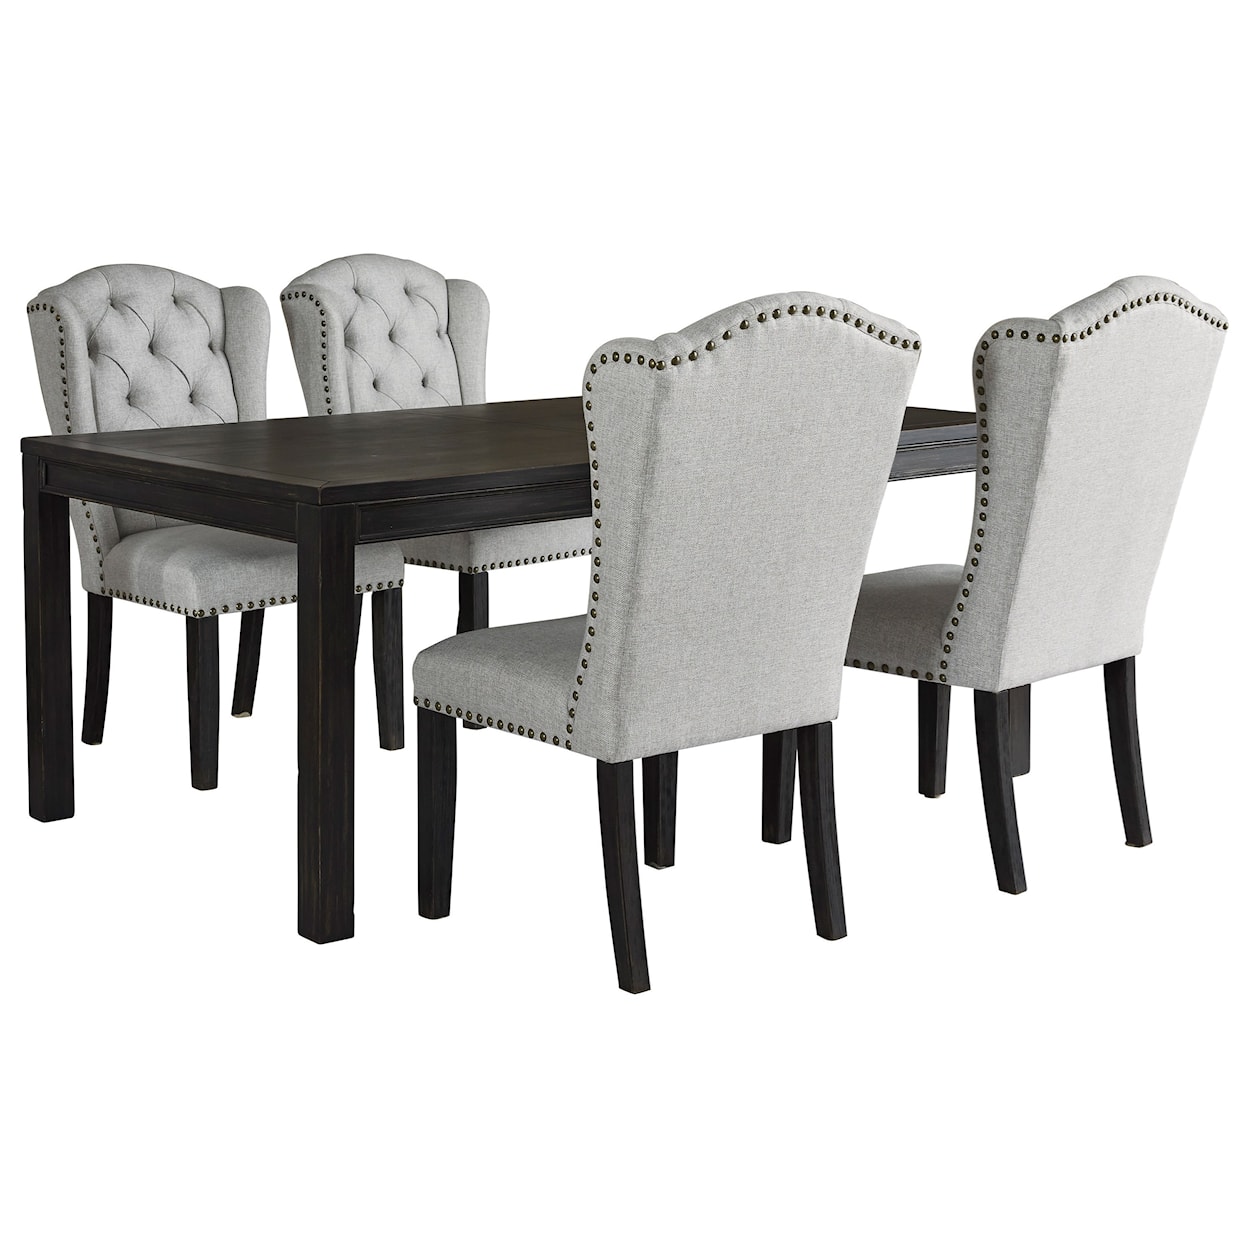 Signature Design by Ashley Jeanette 5pc Dining Room Group